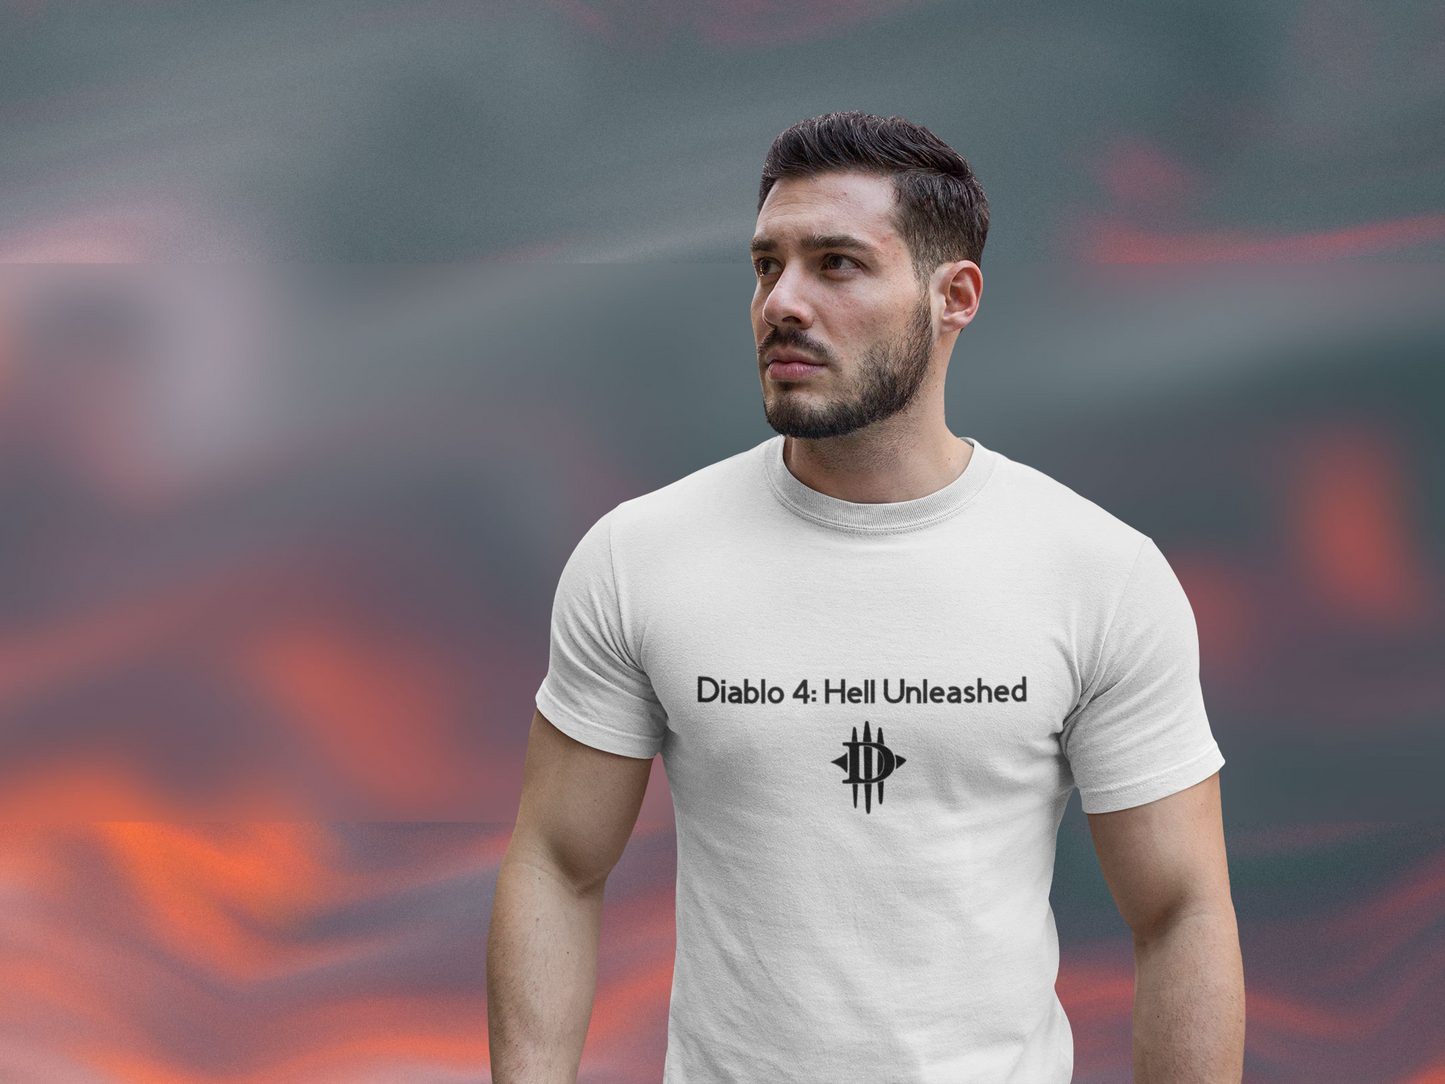 handsome guy wearing a white tshirt that says Diablo 4: Hell Unleashed